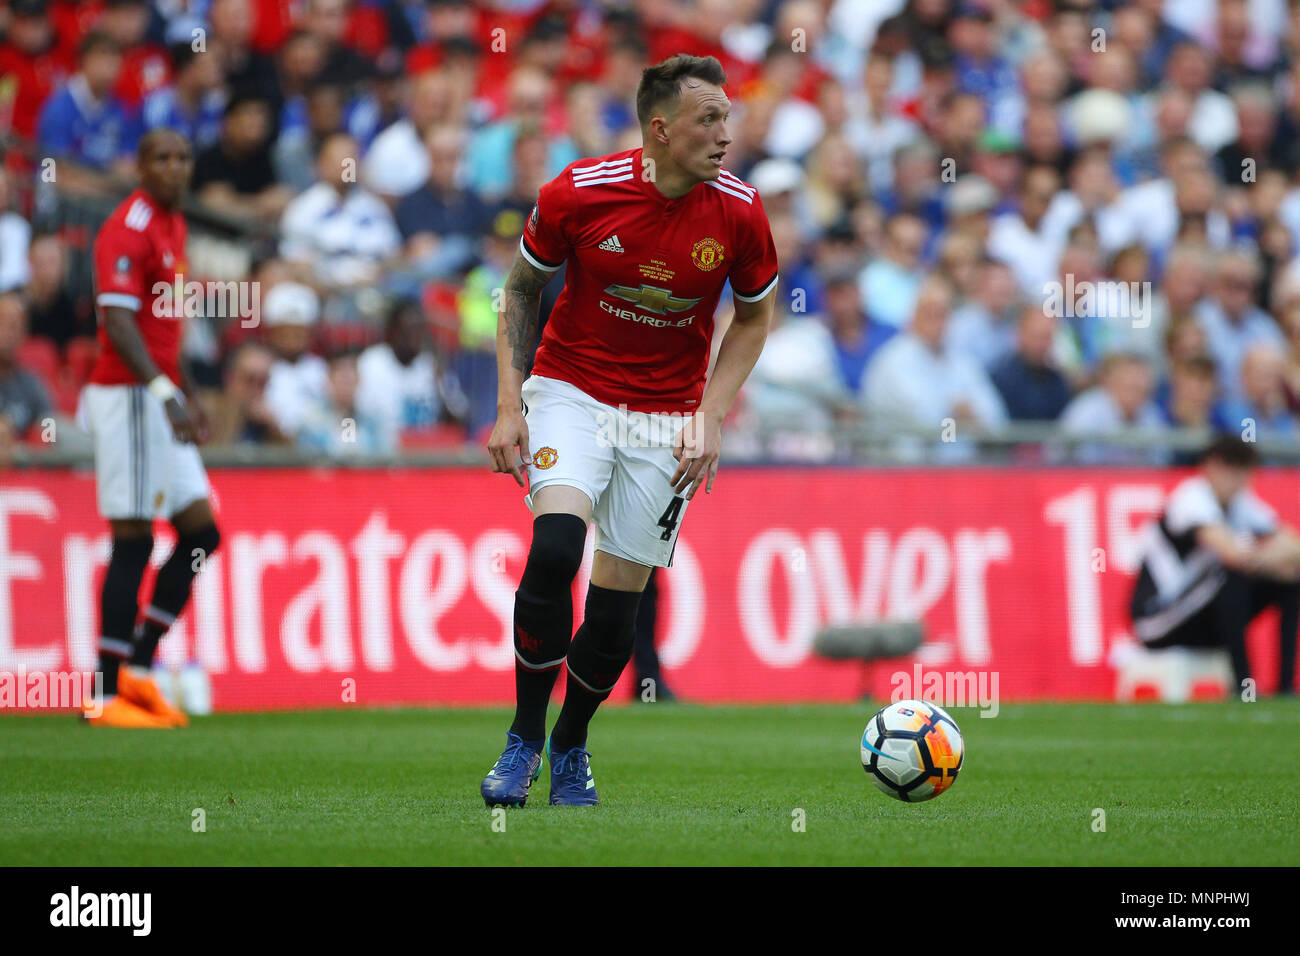 London, UK, 19 May 2018.   Phil Jones of Manchester United during the FA Cup Final match between Chelsea and Manchester United at Wembley Stadium on May 19th 2018 in London, England. (Photo by Paul Chesterton/phcimages.com) Credit: PHC Images/Alamy Live News Credit: PHC Images/Alamy Live News Stock Photo